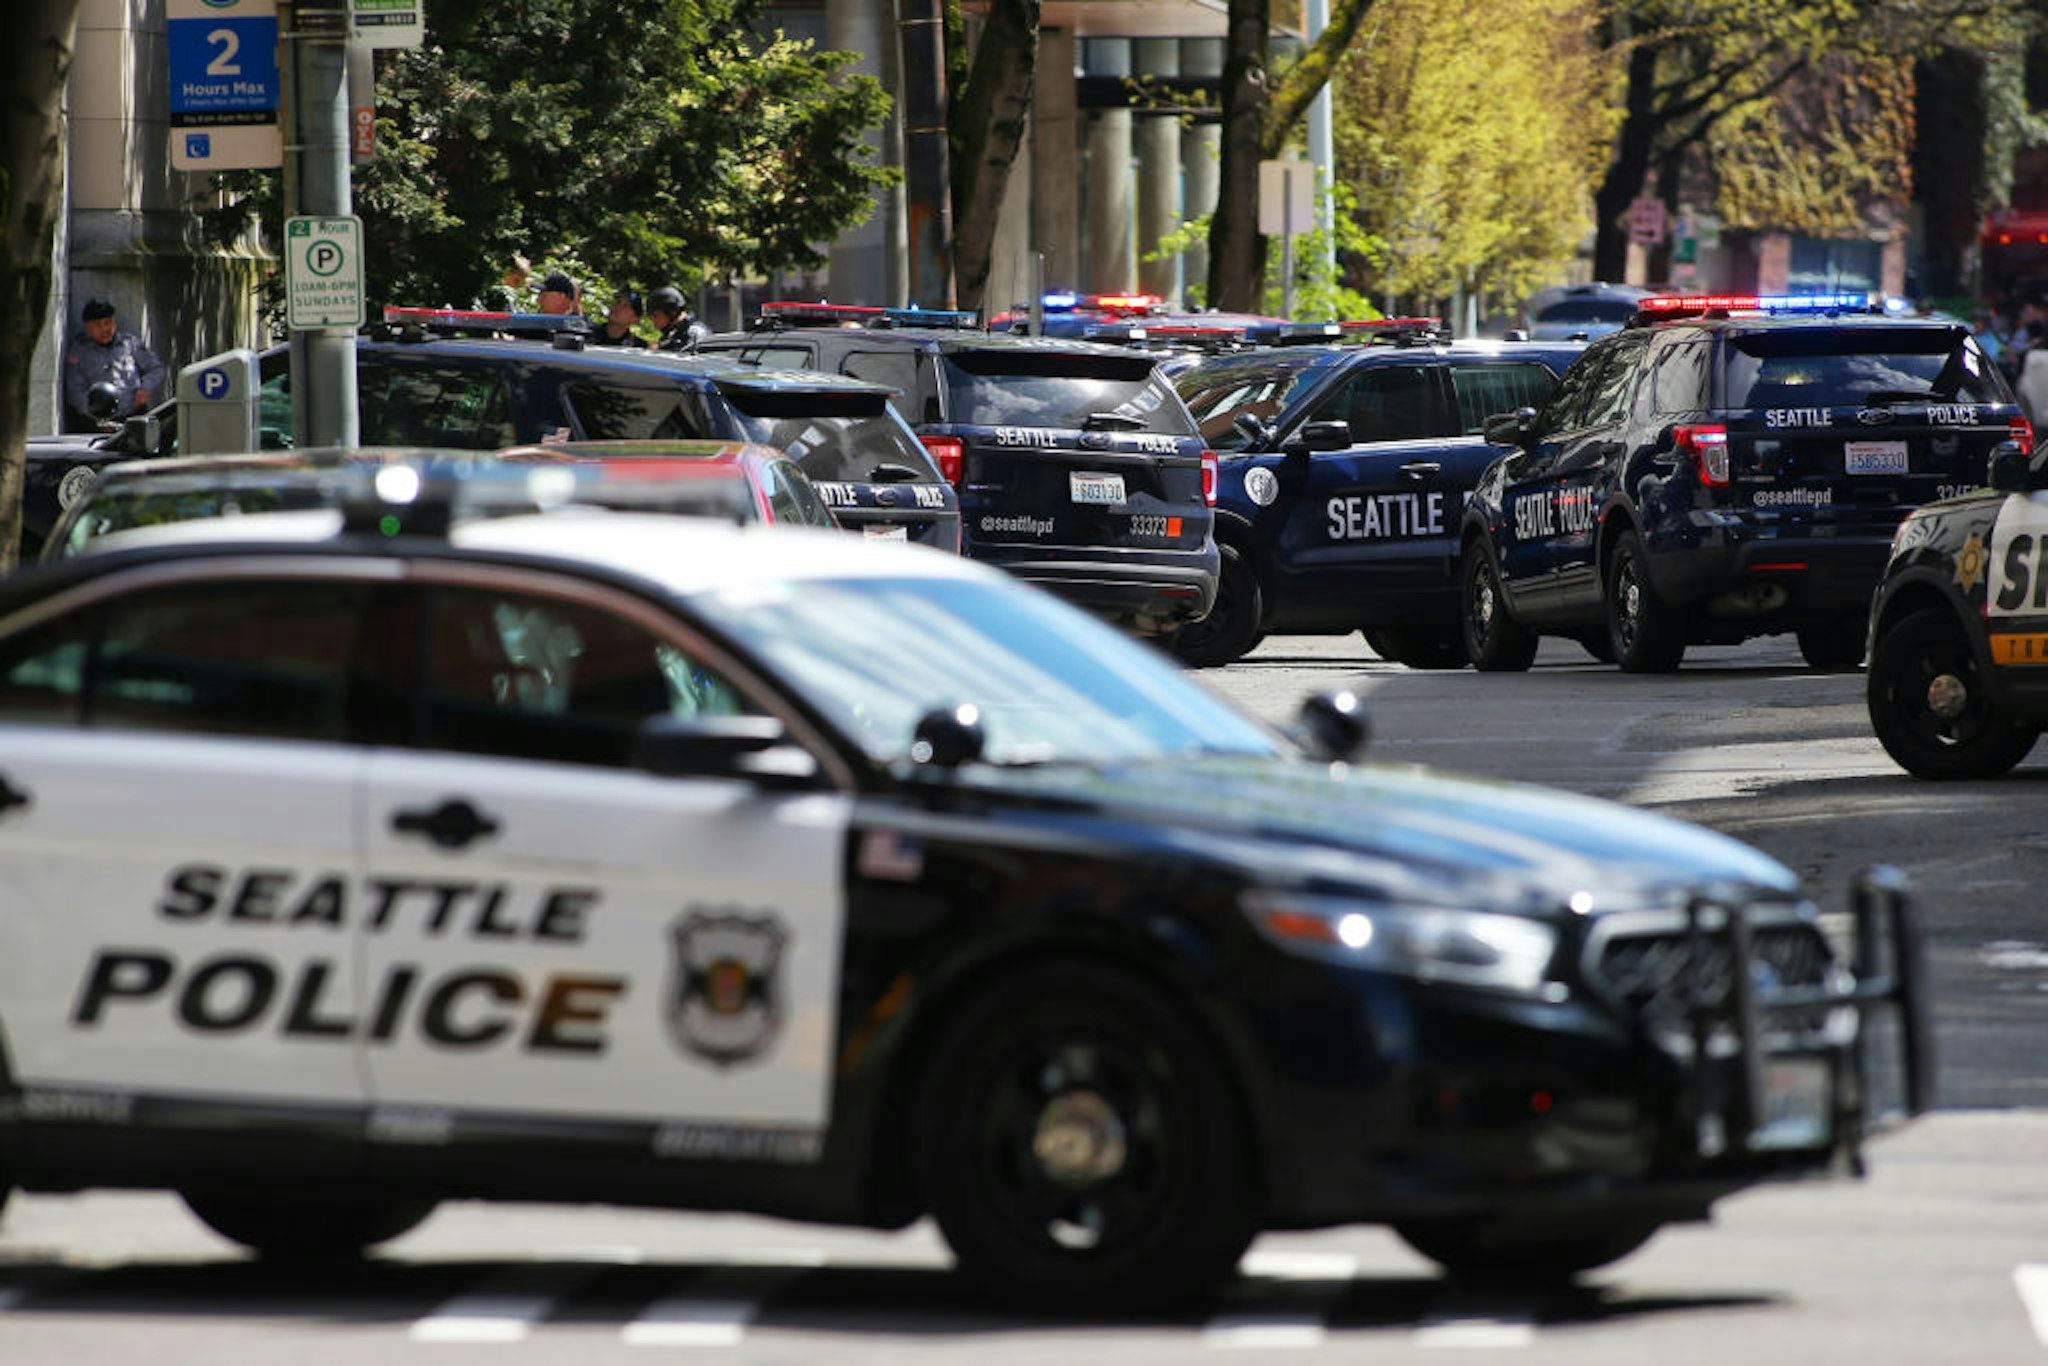 Officers respond after two Seattle Police Department officers were shot while responding to a robbery in downtown Seattle on Thursday, April 20, 2017. (Genna Martin, seattlepi.com) (Photo by GENNA MARTIN/San Francisco Chronicle via Getty Images)